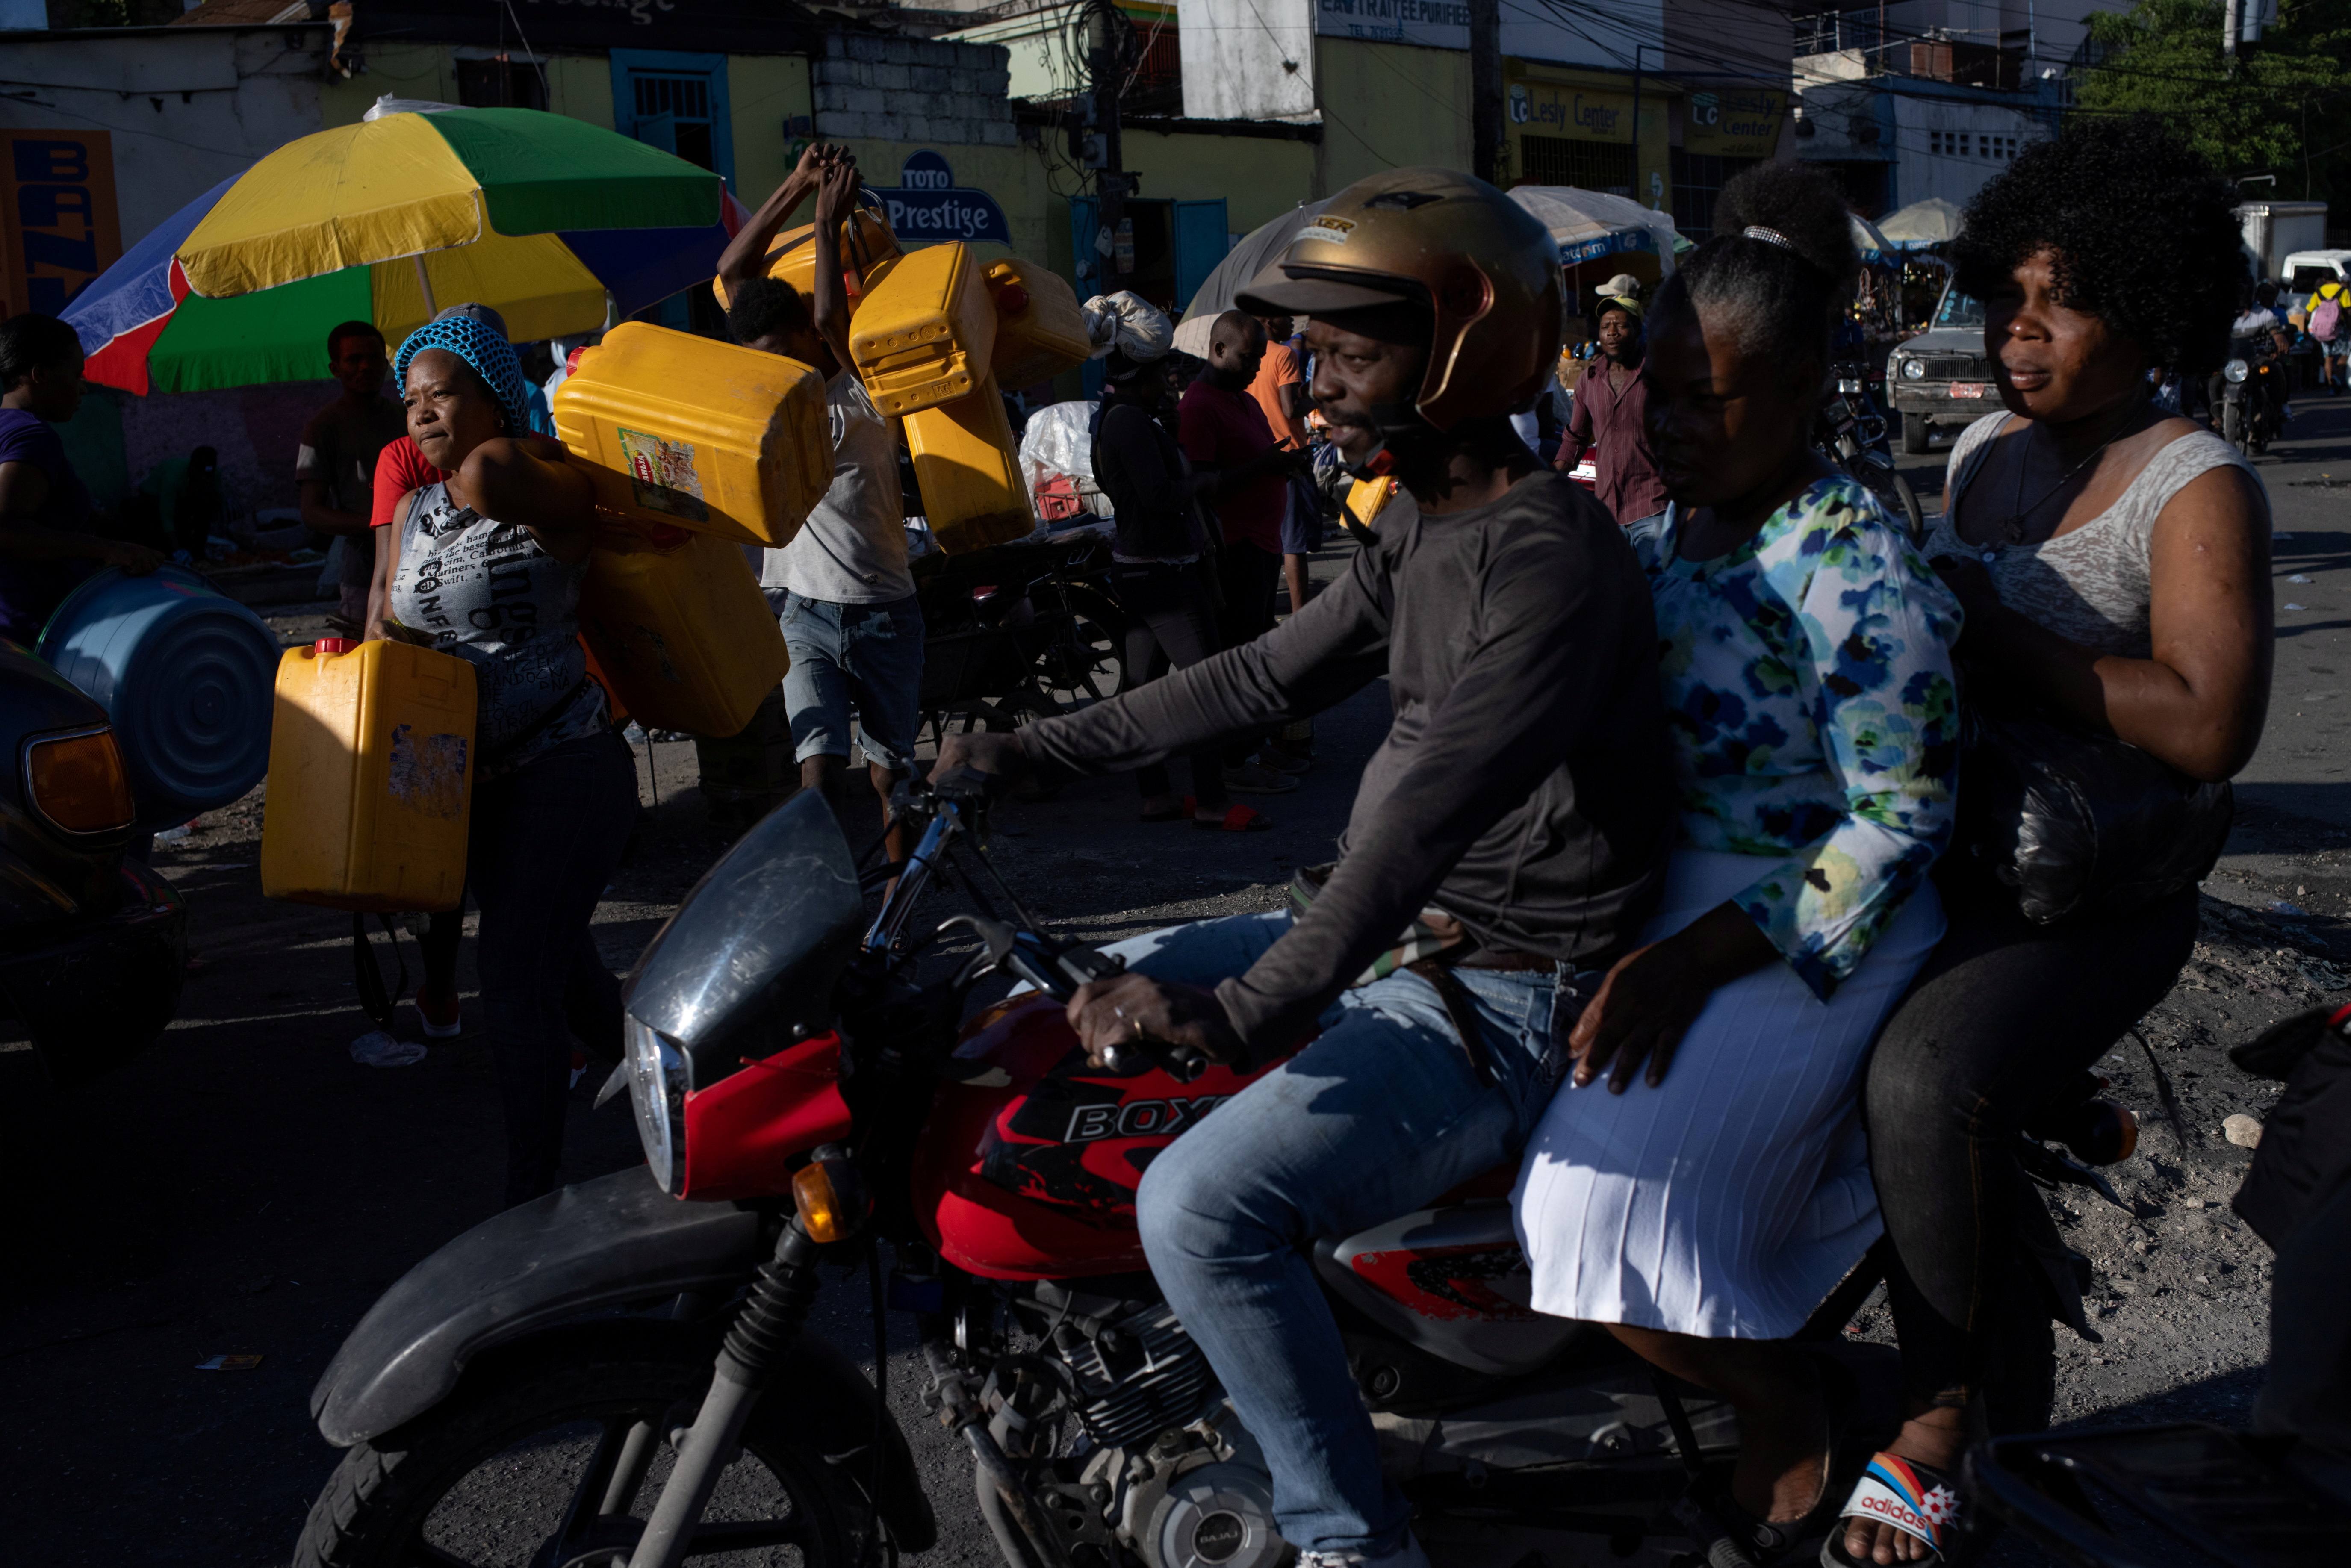 A motorbike passes by as locals carry containers, used for oil and gasoline, during fuel shortages in Port-au-Prince, Haiti October 24, 2021.  REUTERS/Adrees Latif